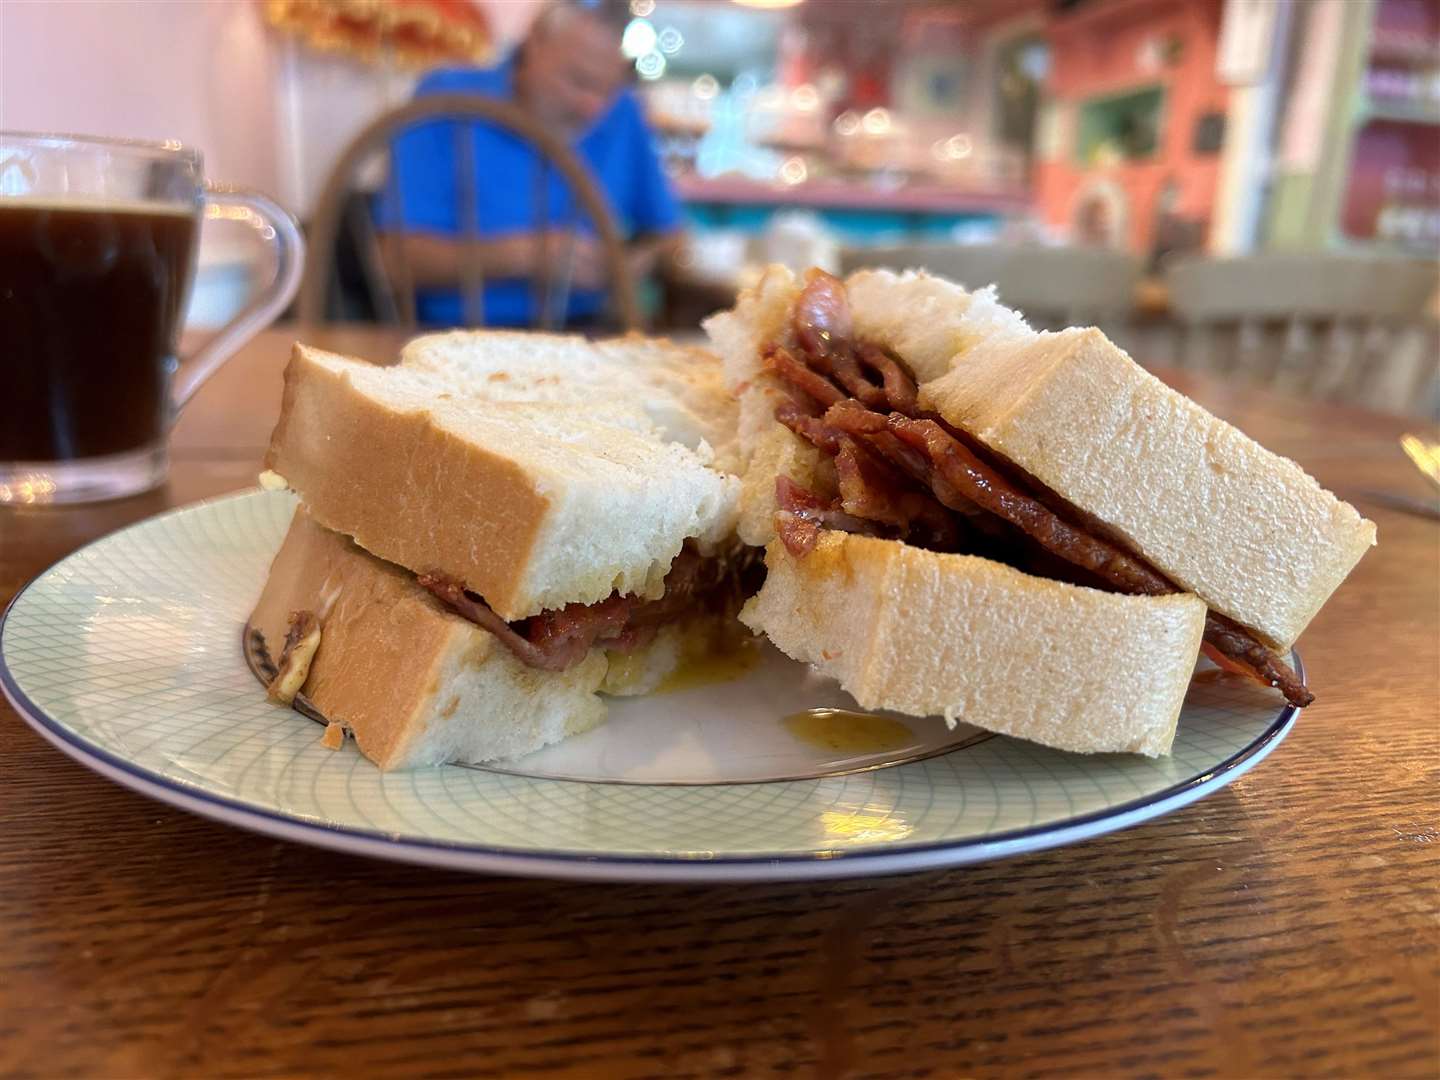 Butter dripping out of the bacon sandwich at The Dog House in Sandgate